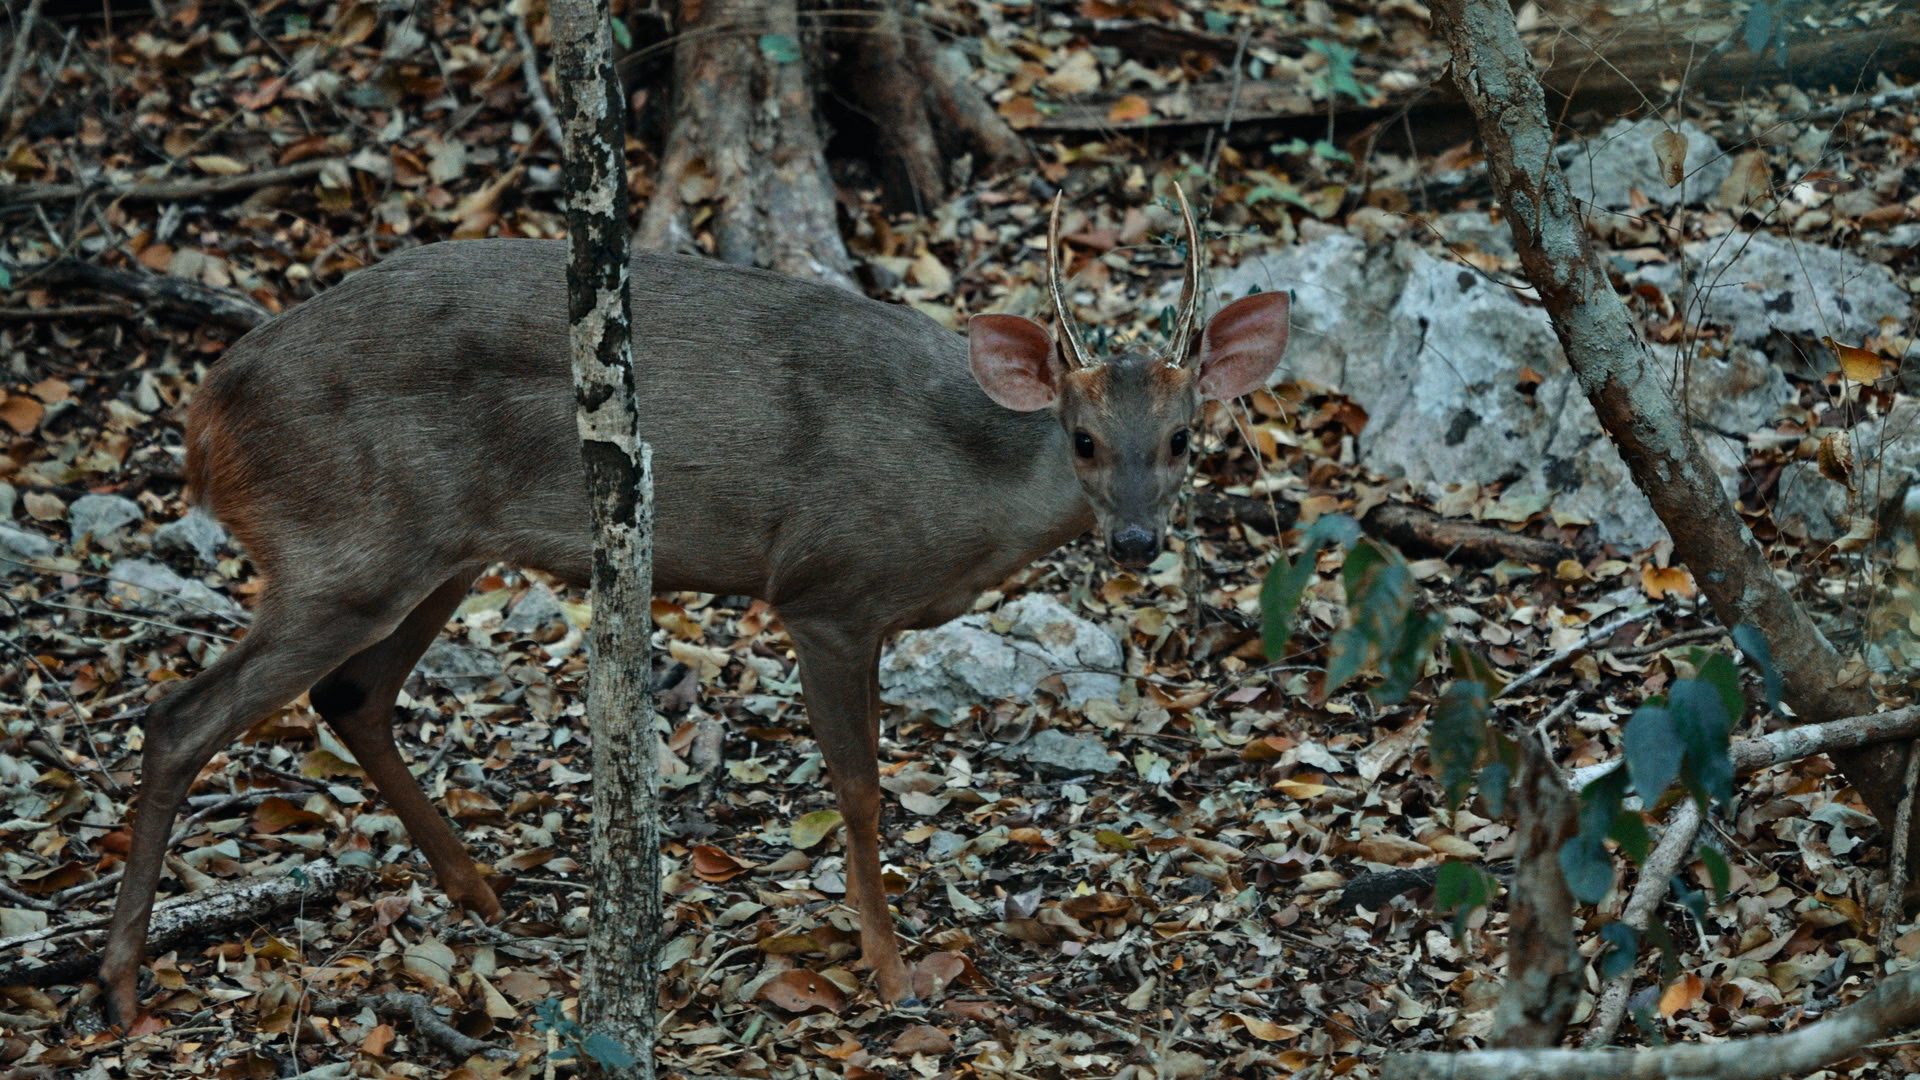 Tropical Deer of Mexico